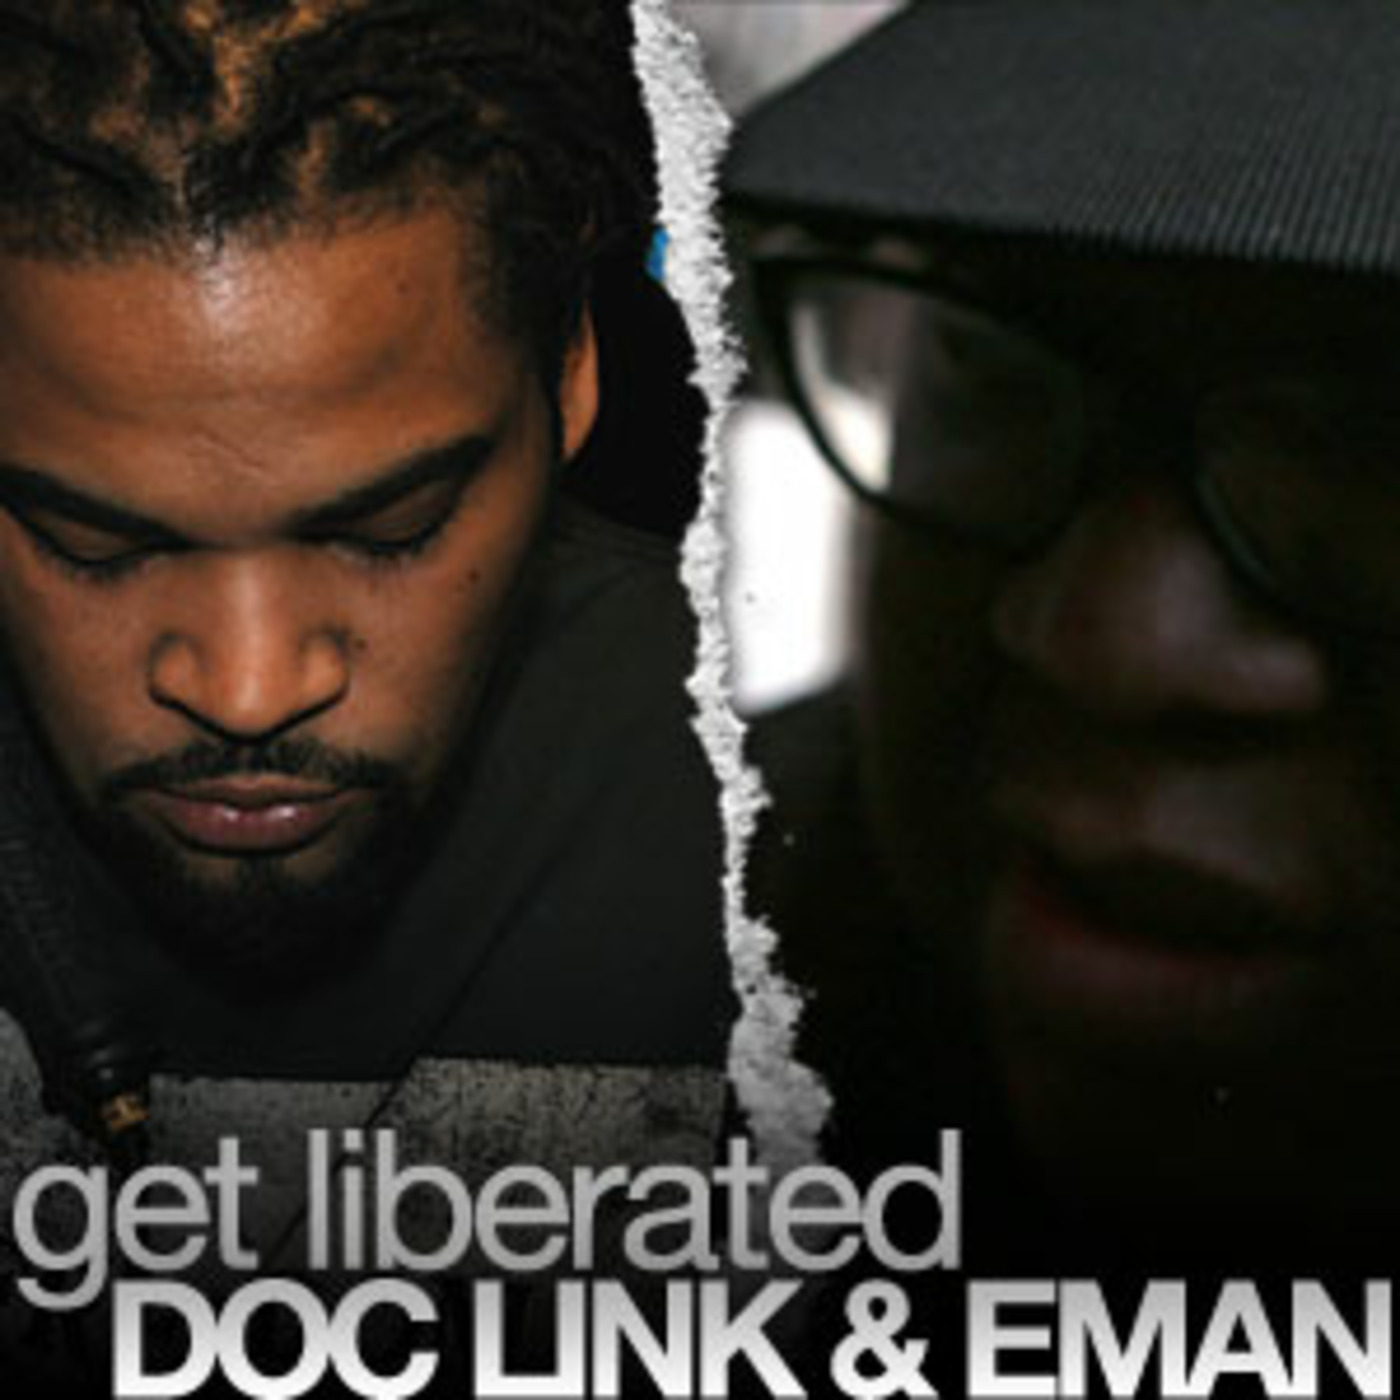 E-Man (NYC) and Doc Link (Chicago) - Liberate Sessions on M&W Radio - Episode 45